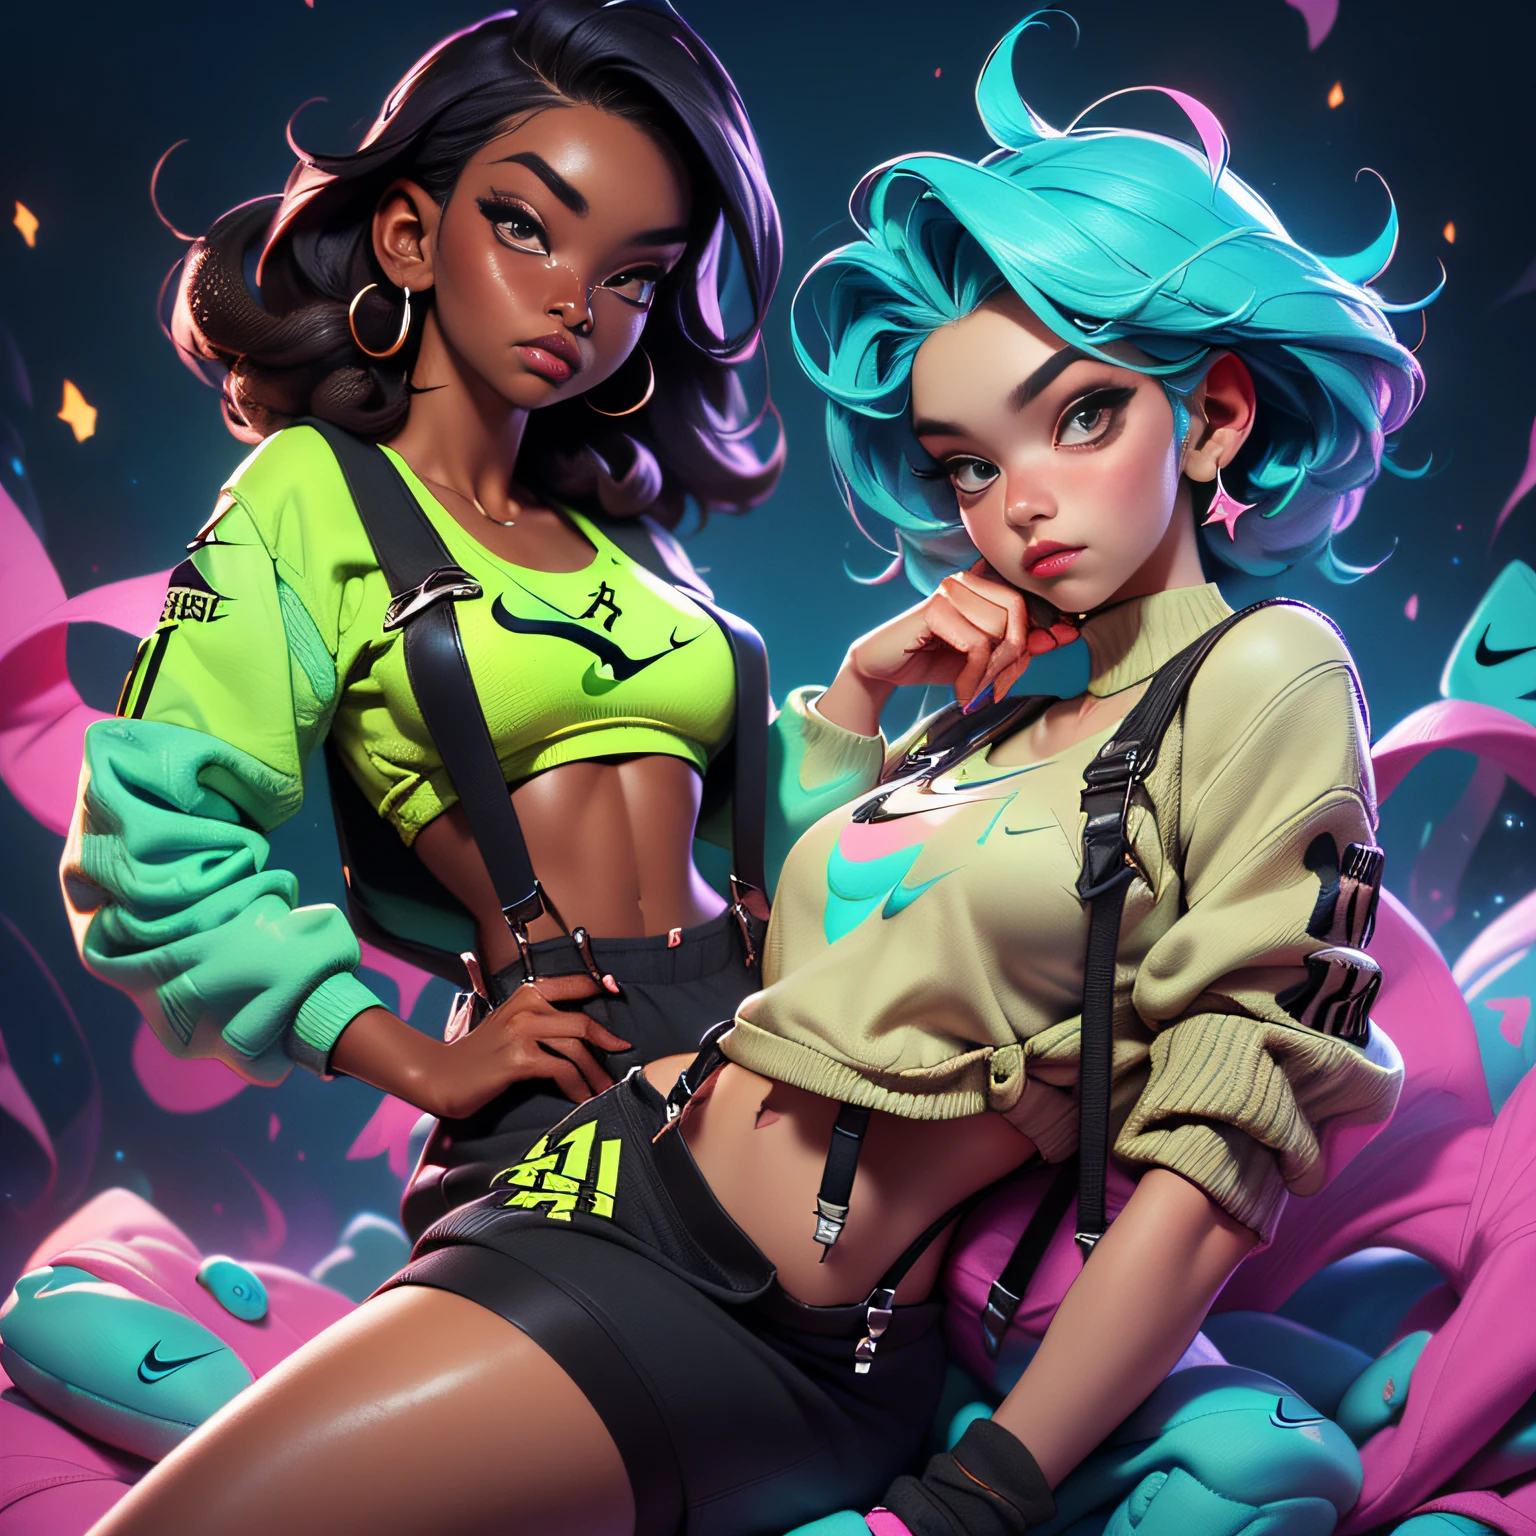 (8k, RAW photo, best quality, masterpiece:1.2) Croud of sexy Girls Two headed giving man a Lap dance 22 year old females with dark skin, Nike sweatsuits , (Nike sweatsuits:1.5), abstract colorful smoke design on cloths, seductive look, looking at camera, chubby 23 year old female with dark skin, Braided 3 different colors neon Pink and Neon Green, contrasting color hair, white overalls, (Crop top Sweatsuit overall suspenders:1.5), (Retro Air Jordan 11 Taxi sneakers:1.5), seductive look, Bioluminescent, City Girls, looking at camera, chubby, 1girl:1.2, body covered in Diamonds and Jewelry A Centerfold named Shauntice, Mixed Race instagram Biracial Ethnic Caremel skin-Mode:1.2, Streetwear Hypebeast supreme:1.3 \(brand\), words on body:1.1, Instagram Braid Artist instagram Hair stylist (1girl), 2 colored hair, (Nebula smoke behind head and eyes Ethereal:1.2, , Alberto Seveso, fantasy art:1.1, ((Fantasy background)) , long smoke hair:1.2, outdoors, aestheticism), (goosebumps:0.5), subsurface scattering, (masterpiece, top quality, best quality, official art, beautiful and aesthetic:1.2), extreme detailed, colorful, highest detailed